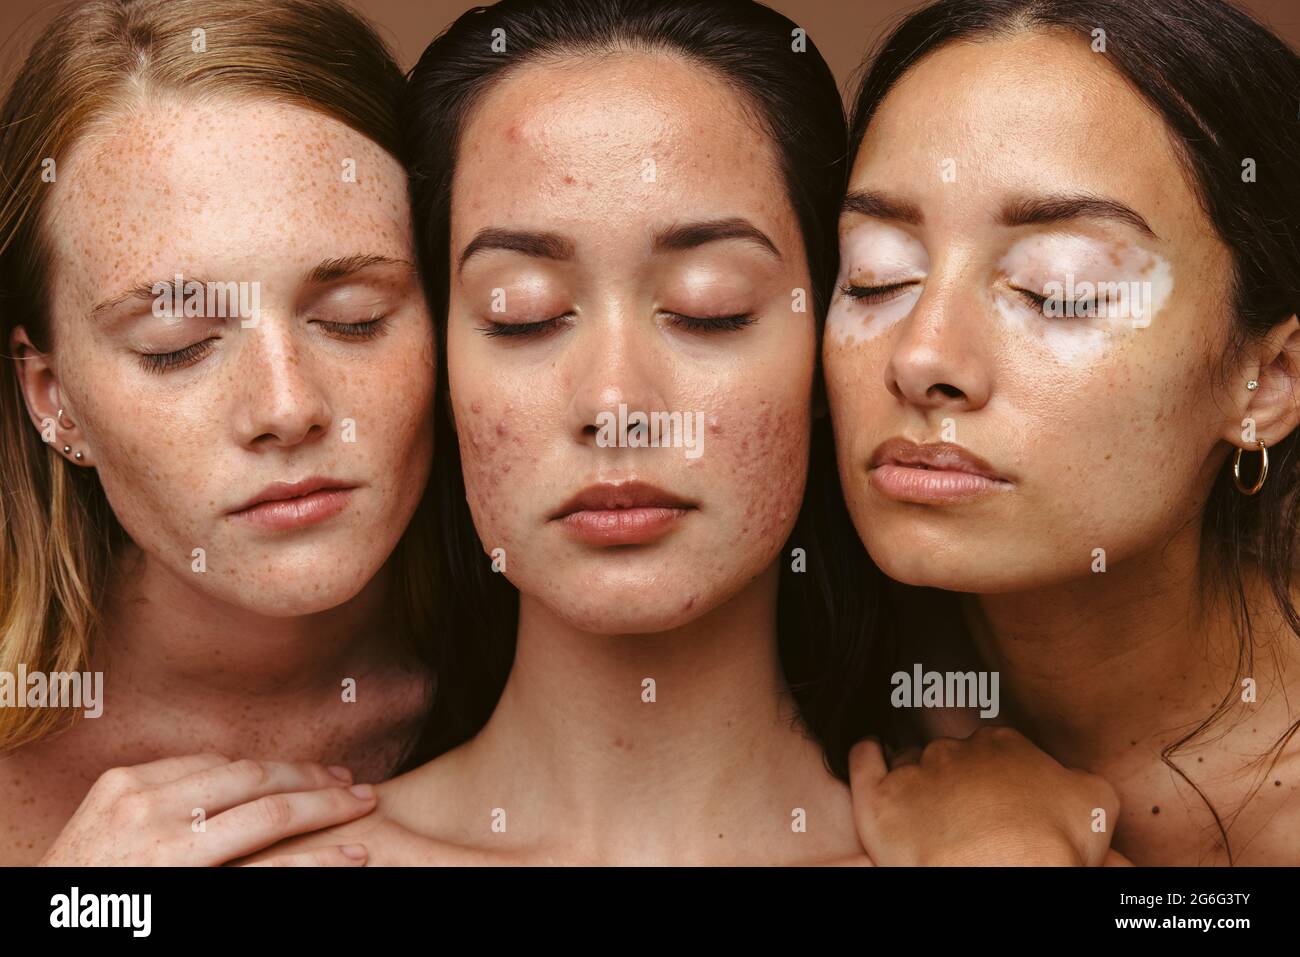 Portrait of three women with skin problems together on brown background. Close up of women having skin conditions with eyes closed Stock Photo